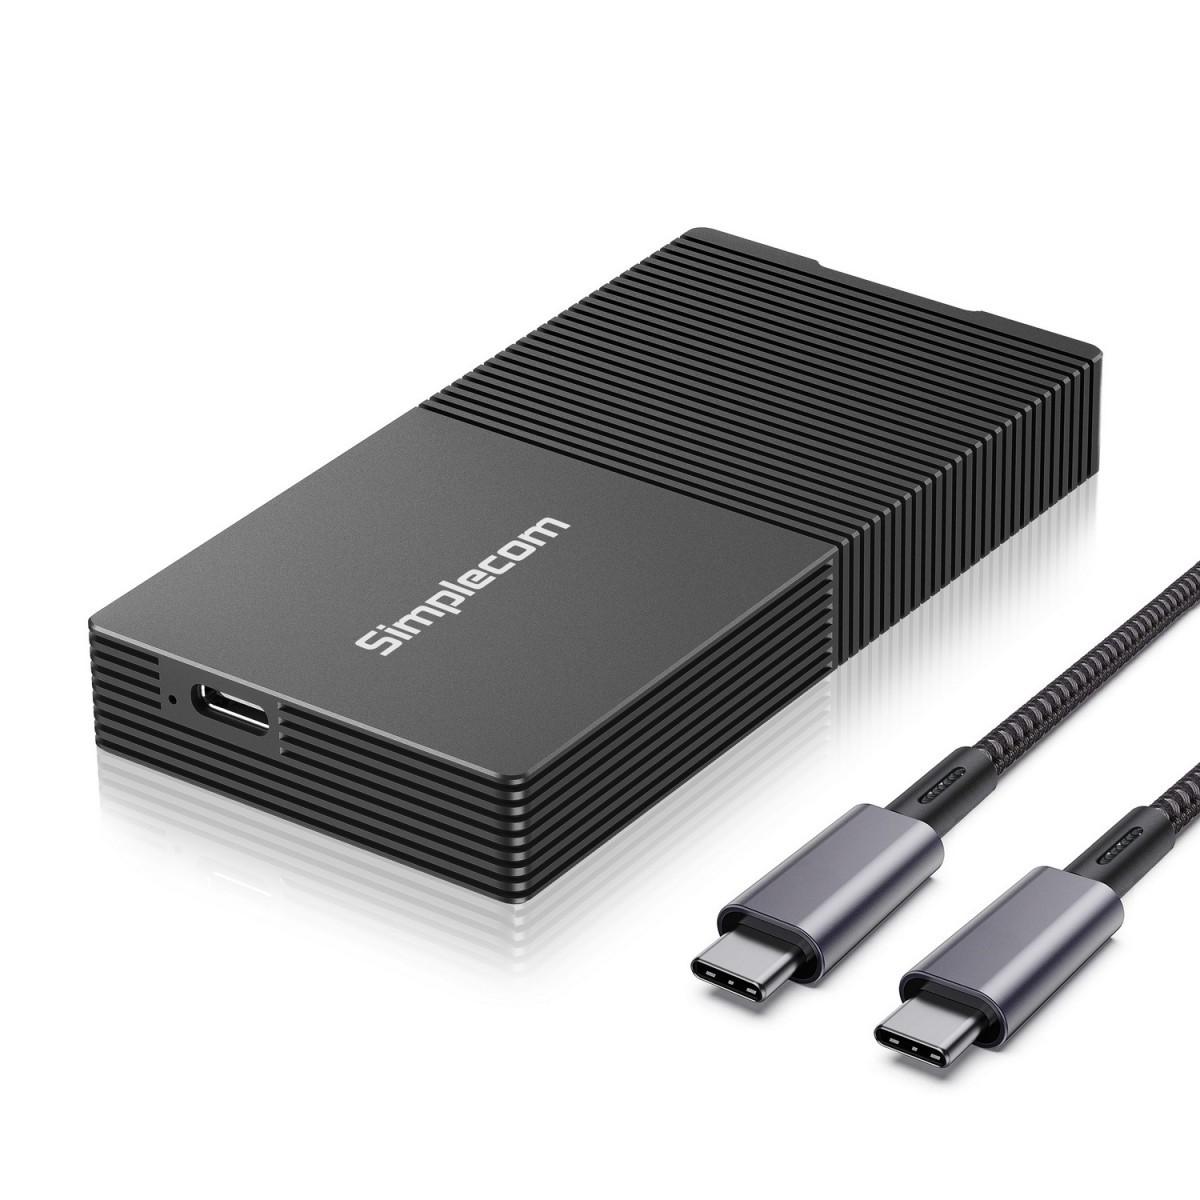  USB4 to NVMe M.2 SSD USB-C Enclosure 40Gbps  